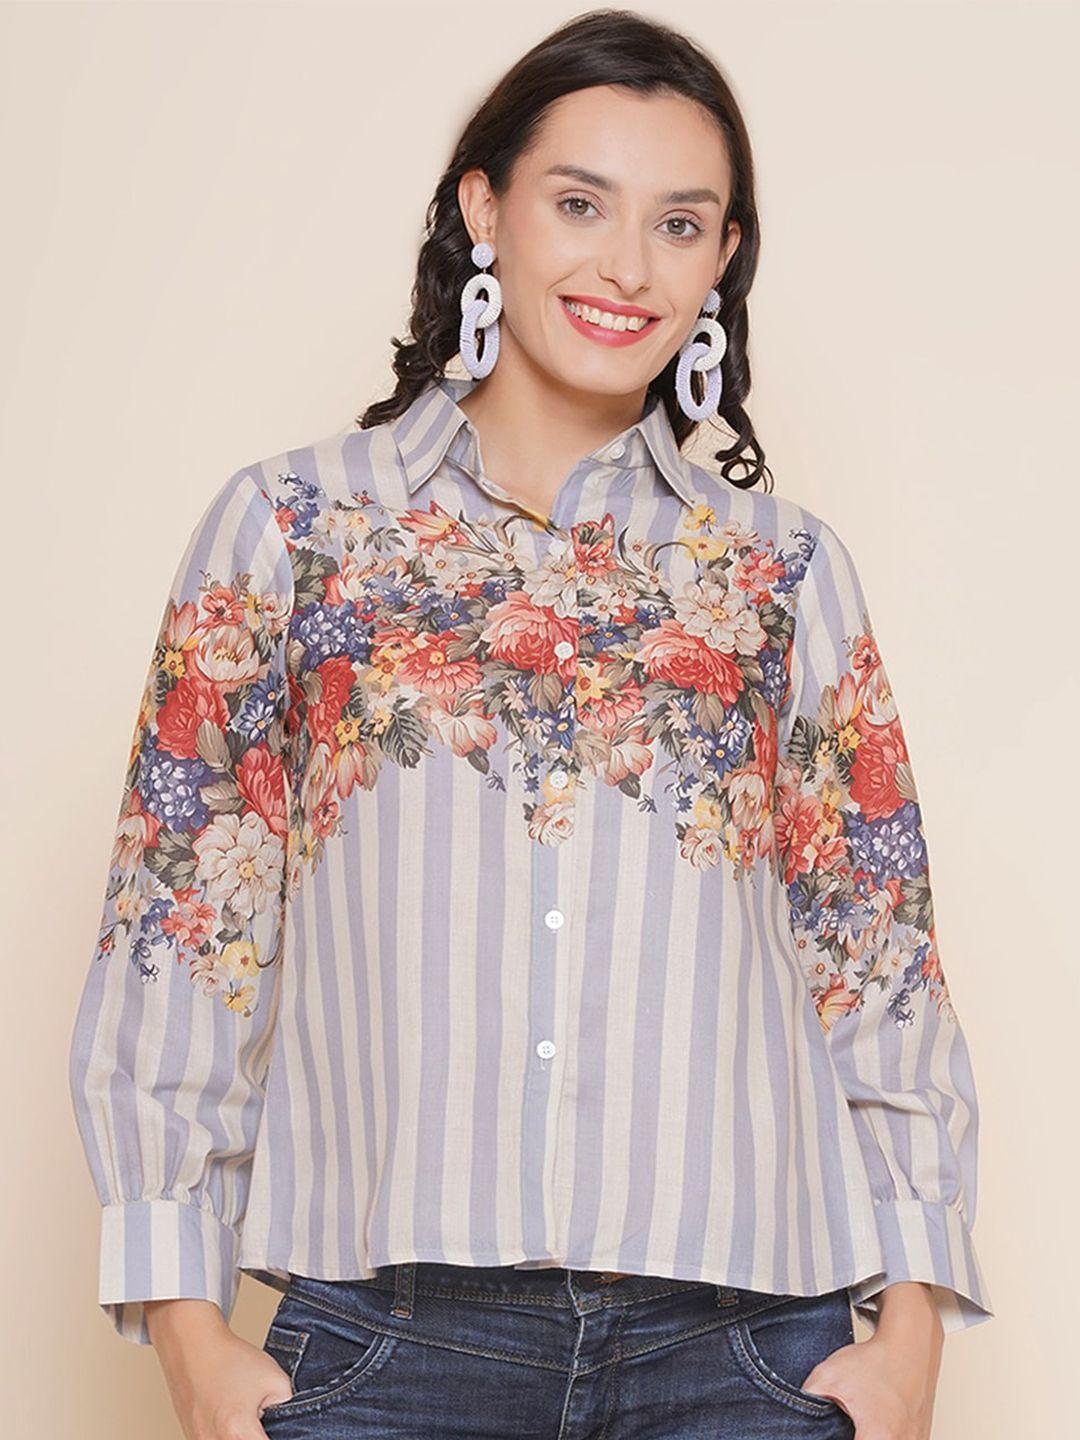 bhama couture floral printed cotton shirt style top